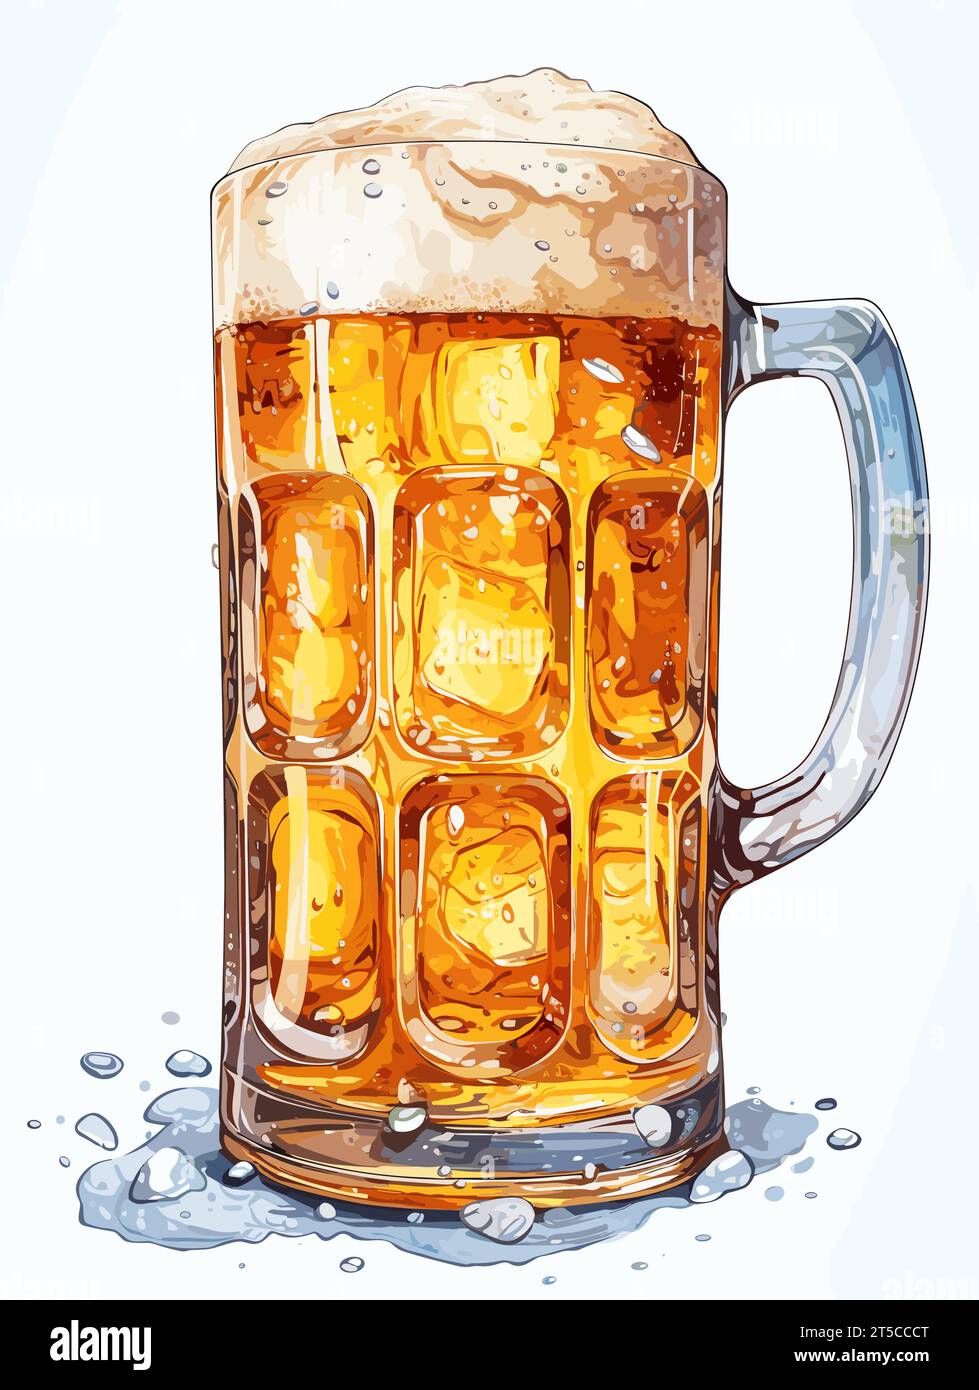 Drawing of full of beer glass mug with foam illustration separated, sweeping overdrawn lines. Stock Vector